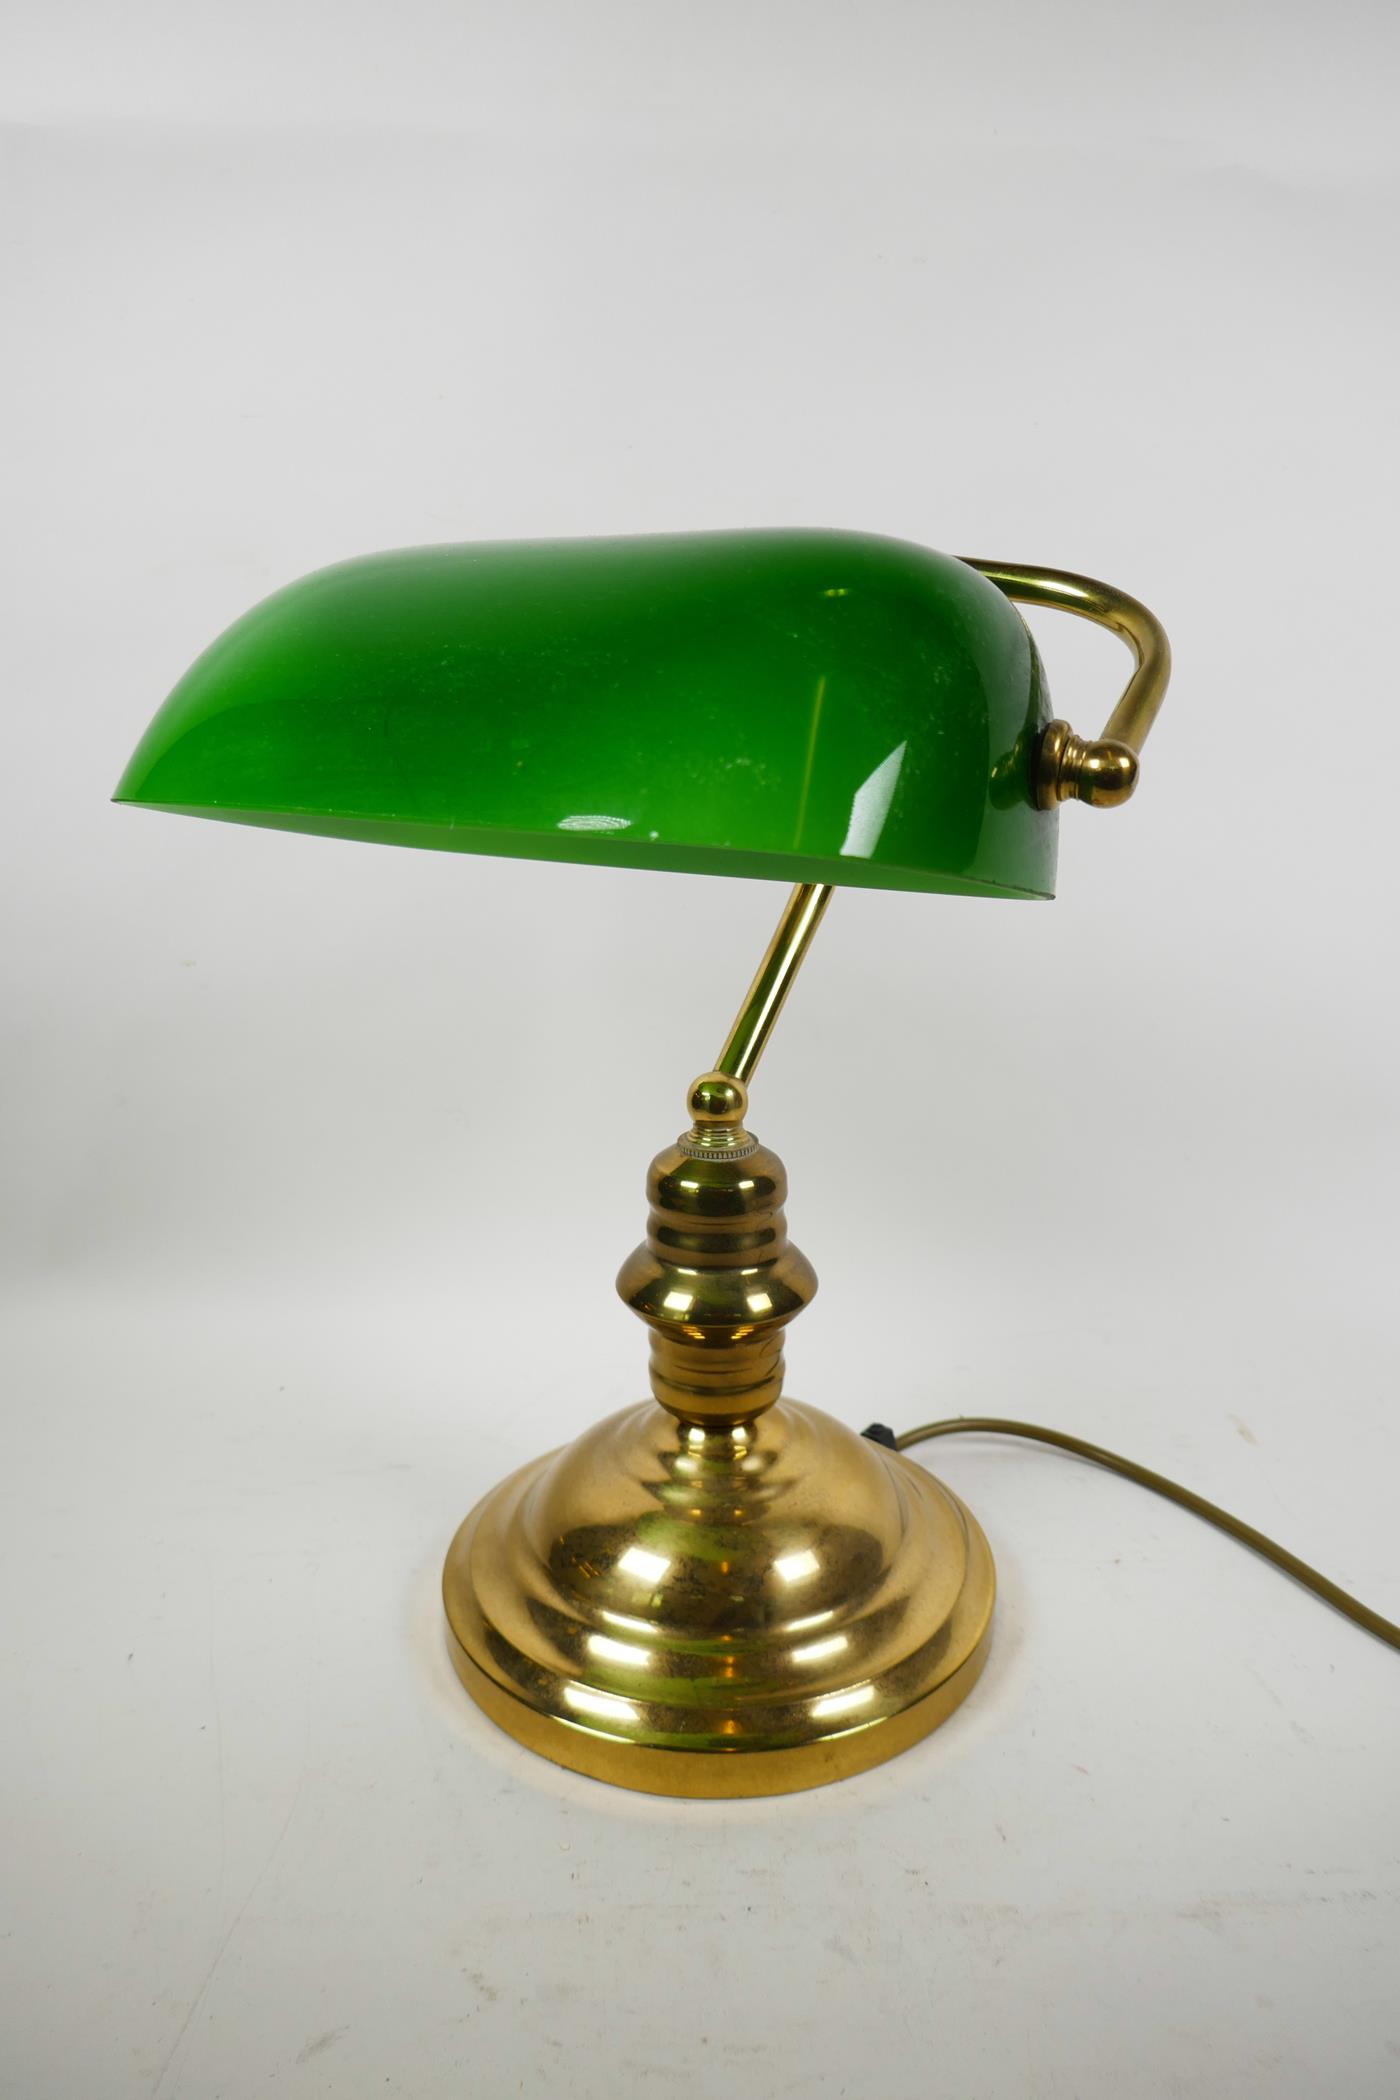 A brass desk lamp with adjustable green glass shade, 13" high - Image 2 of 3